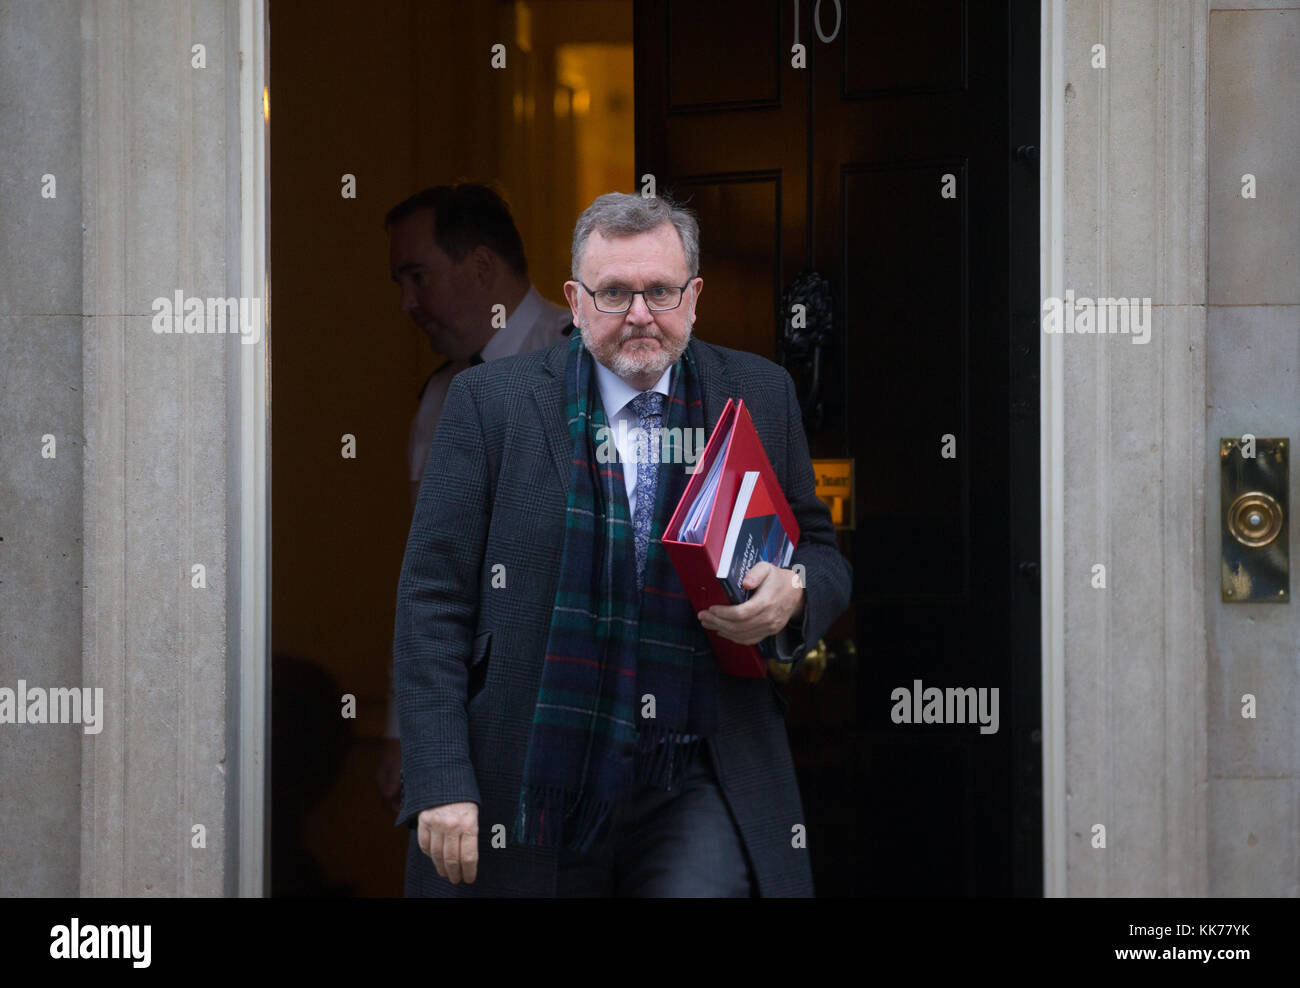 David Mundell,MP for Dumfriesshire,Clydesdale and Tweedale and Secretary of State for Scotland, leaves 10 Downing street after a Cabinet meeting Stock Photo